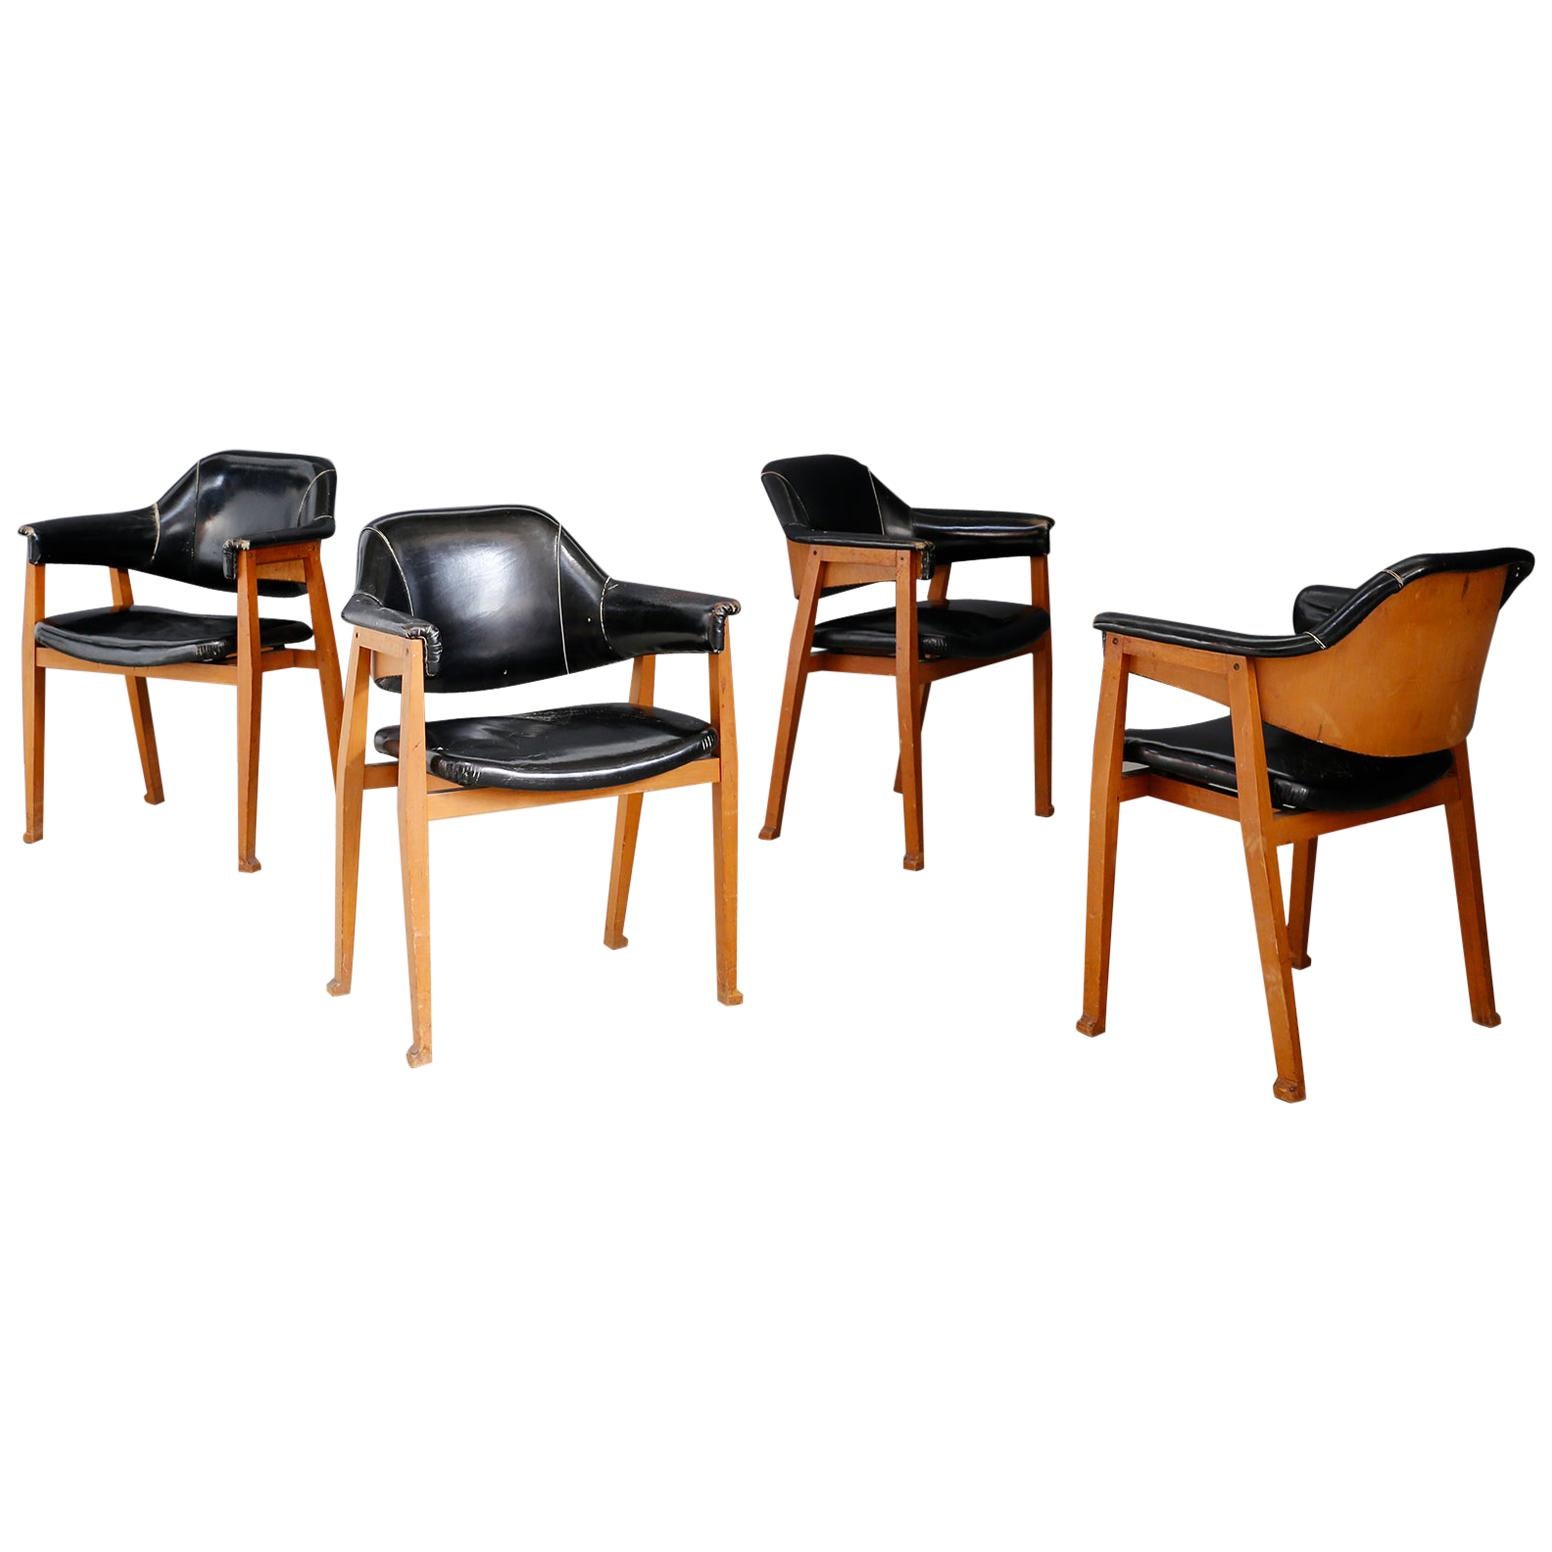 Set of Four Chair Attributed to BBPR in Wood and Black Leather, 1950s